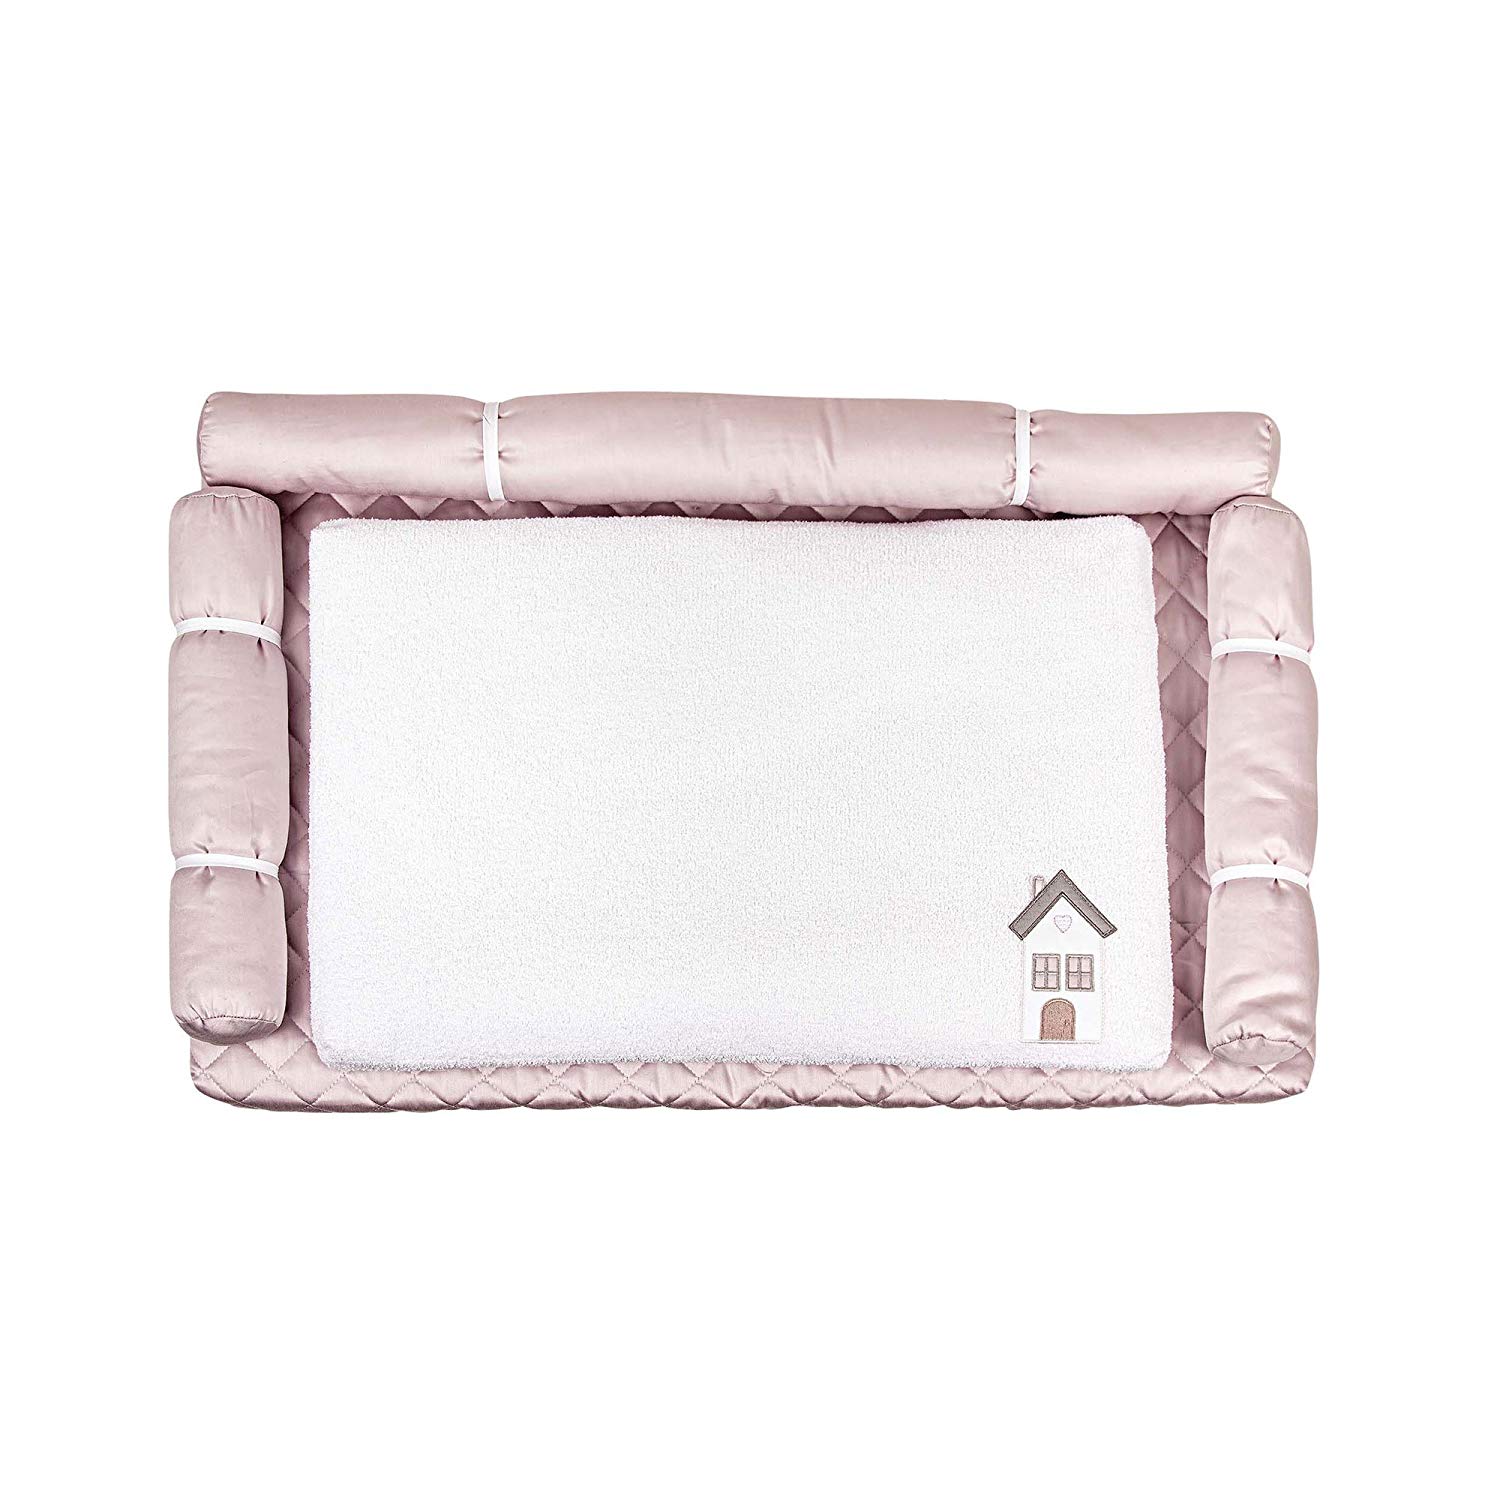 Dilibest by Picci Urban Smile Pink Changing Mat 50 x 80 cm. Luxury Fabric Mat (Made in Italy